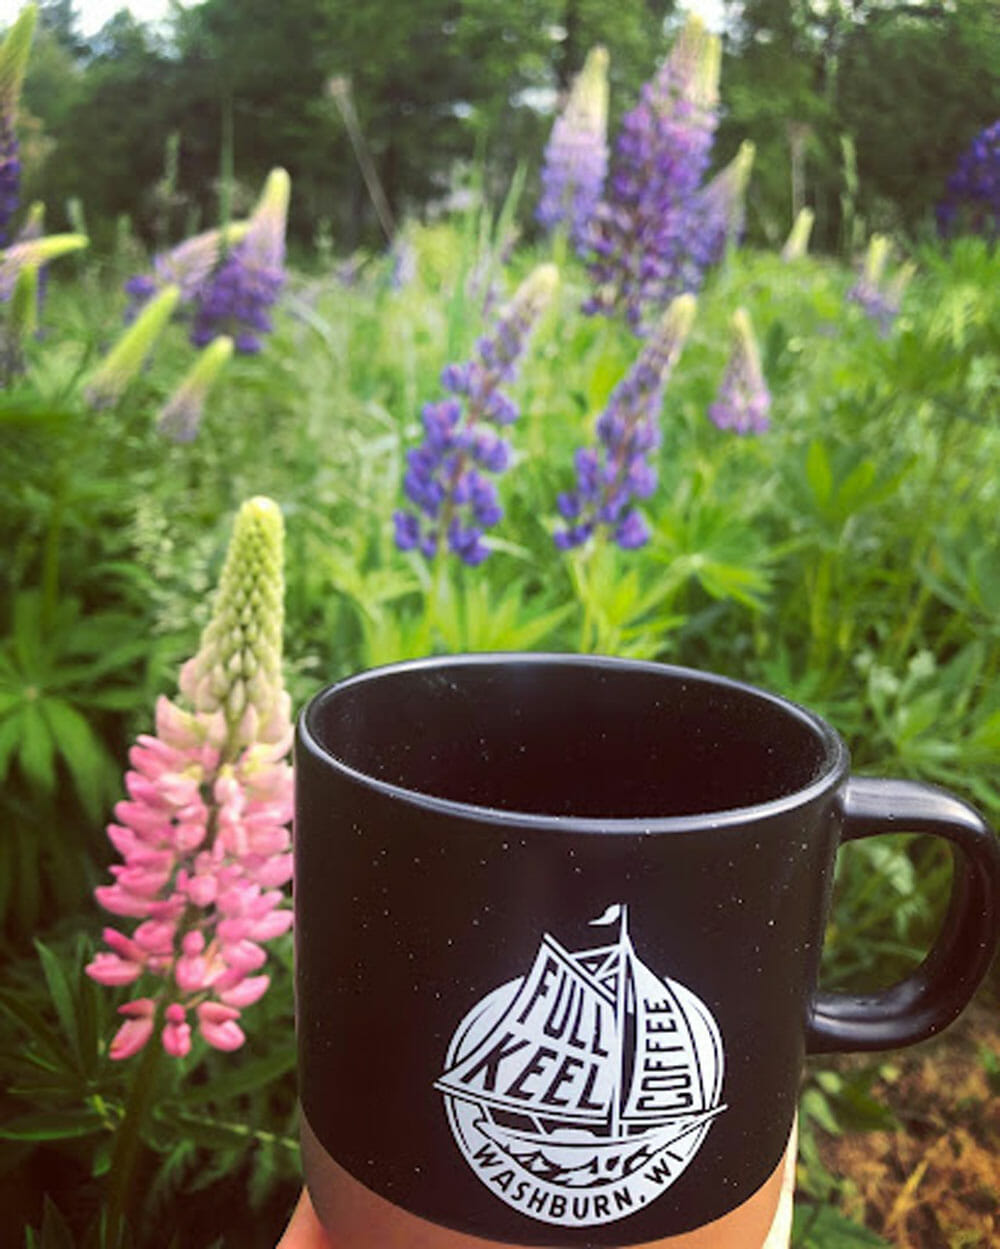 A black mug with a white logo being held up in front of a garden.